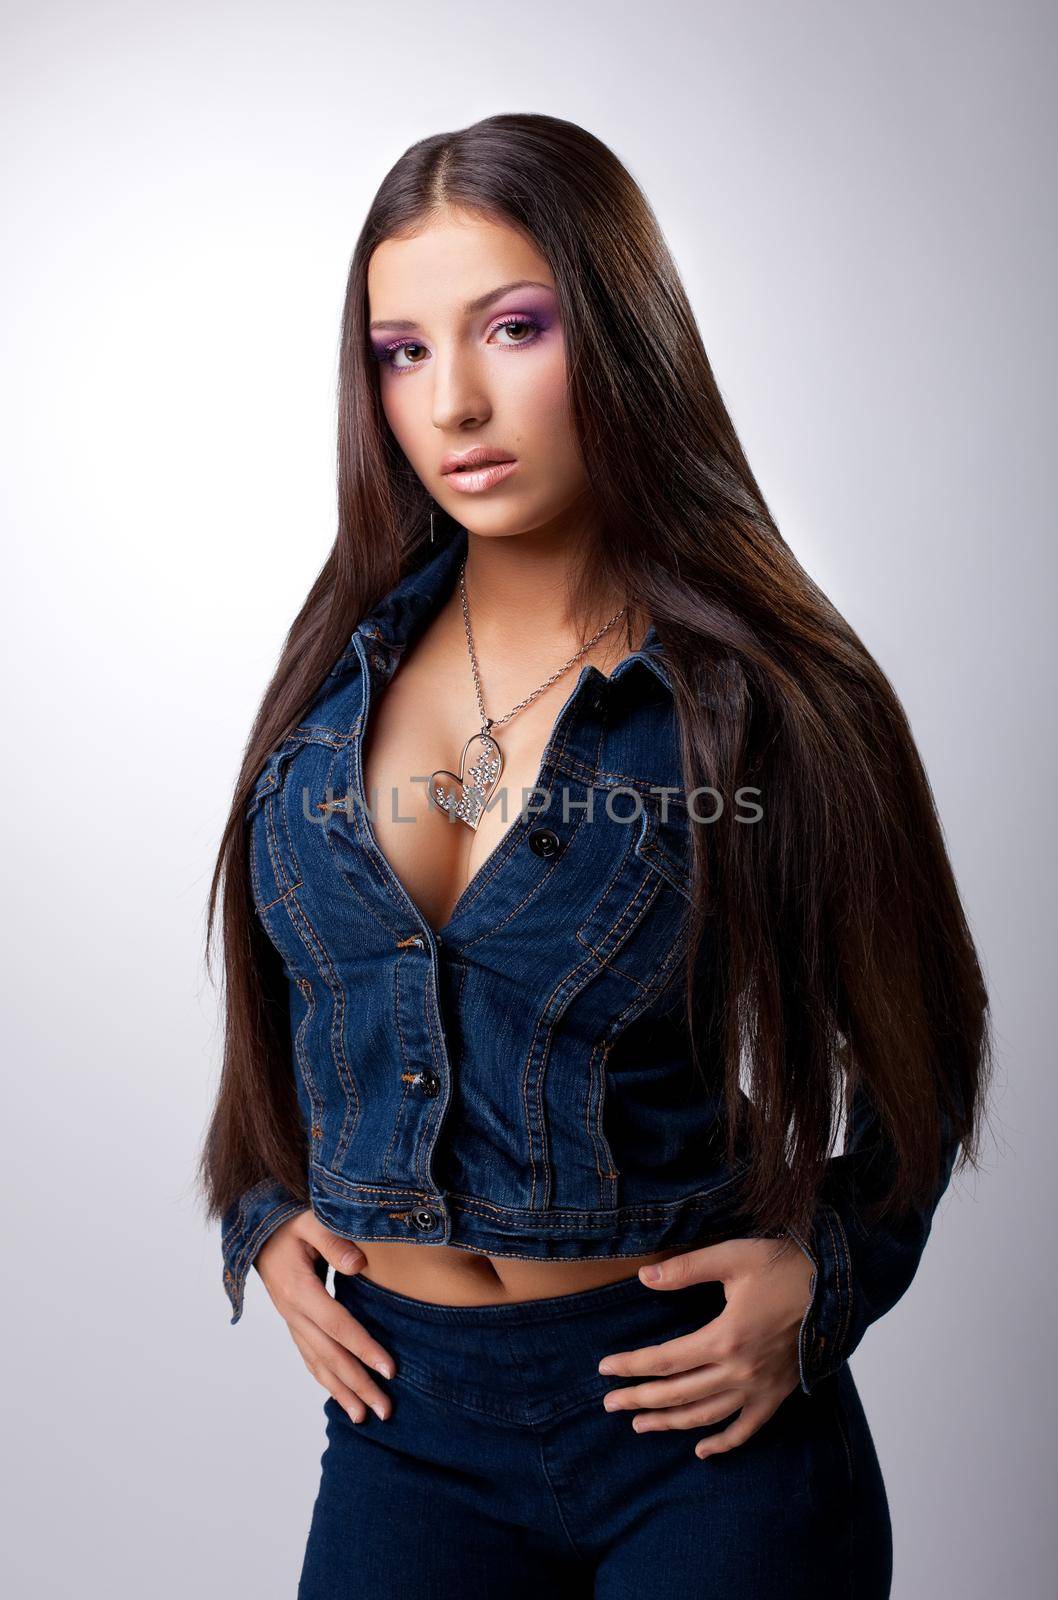 Sexy young brunette portrait posing in jeans costume with long hair